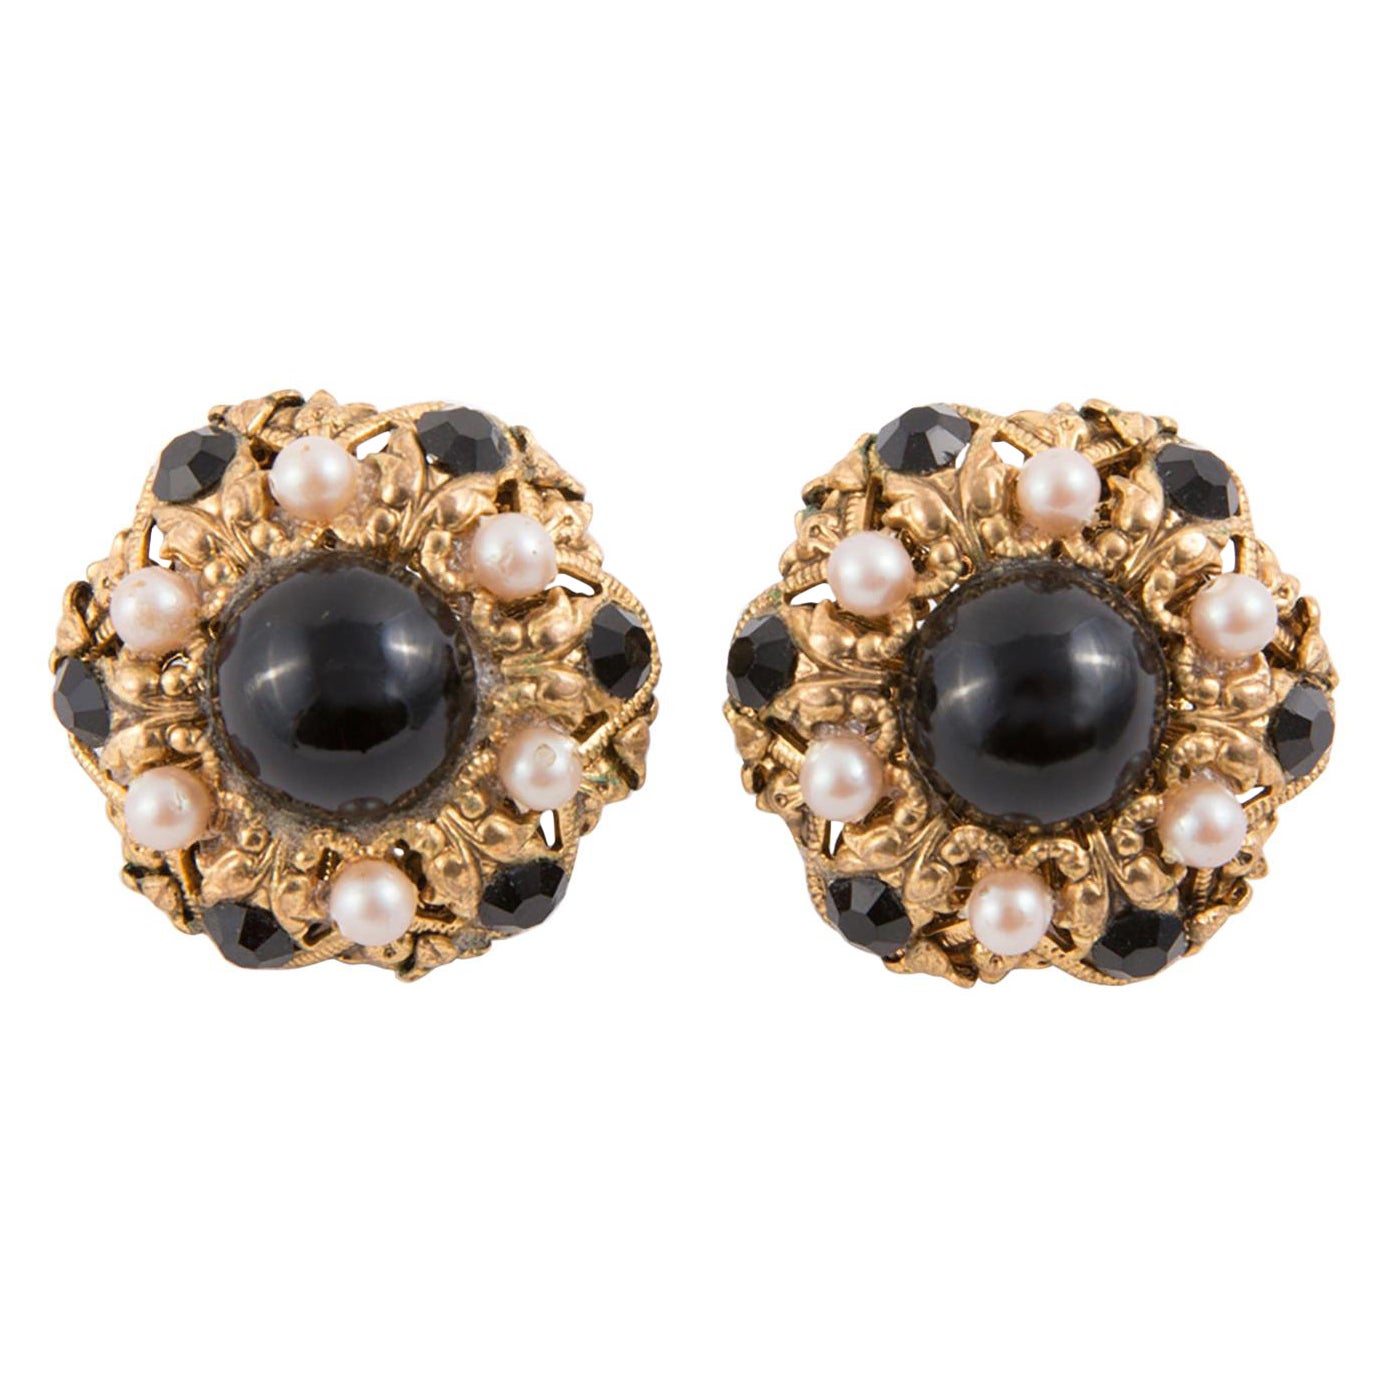 1960s Black and Gold Tone Clip on Earrings